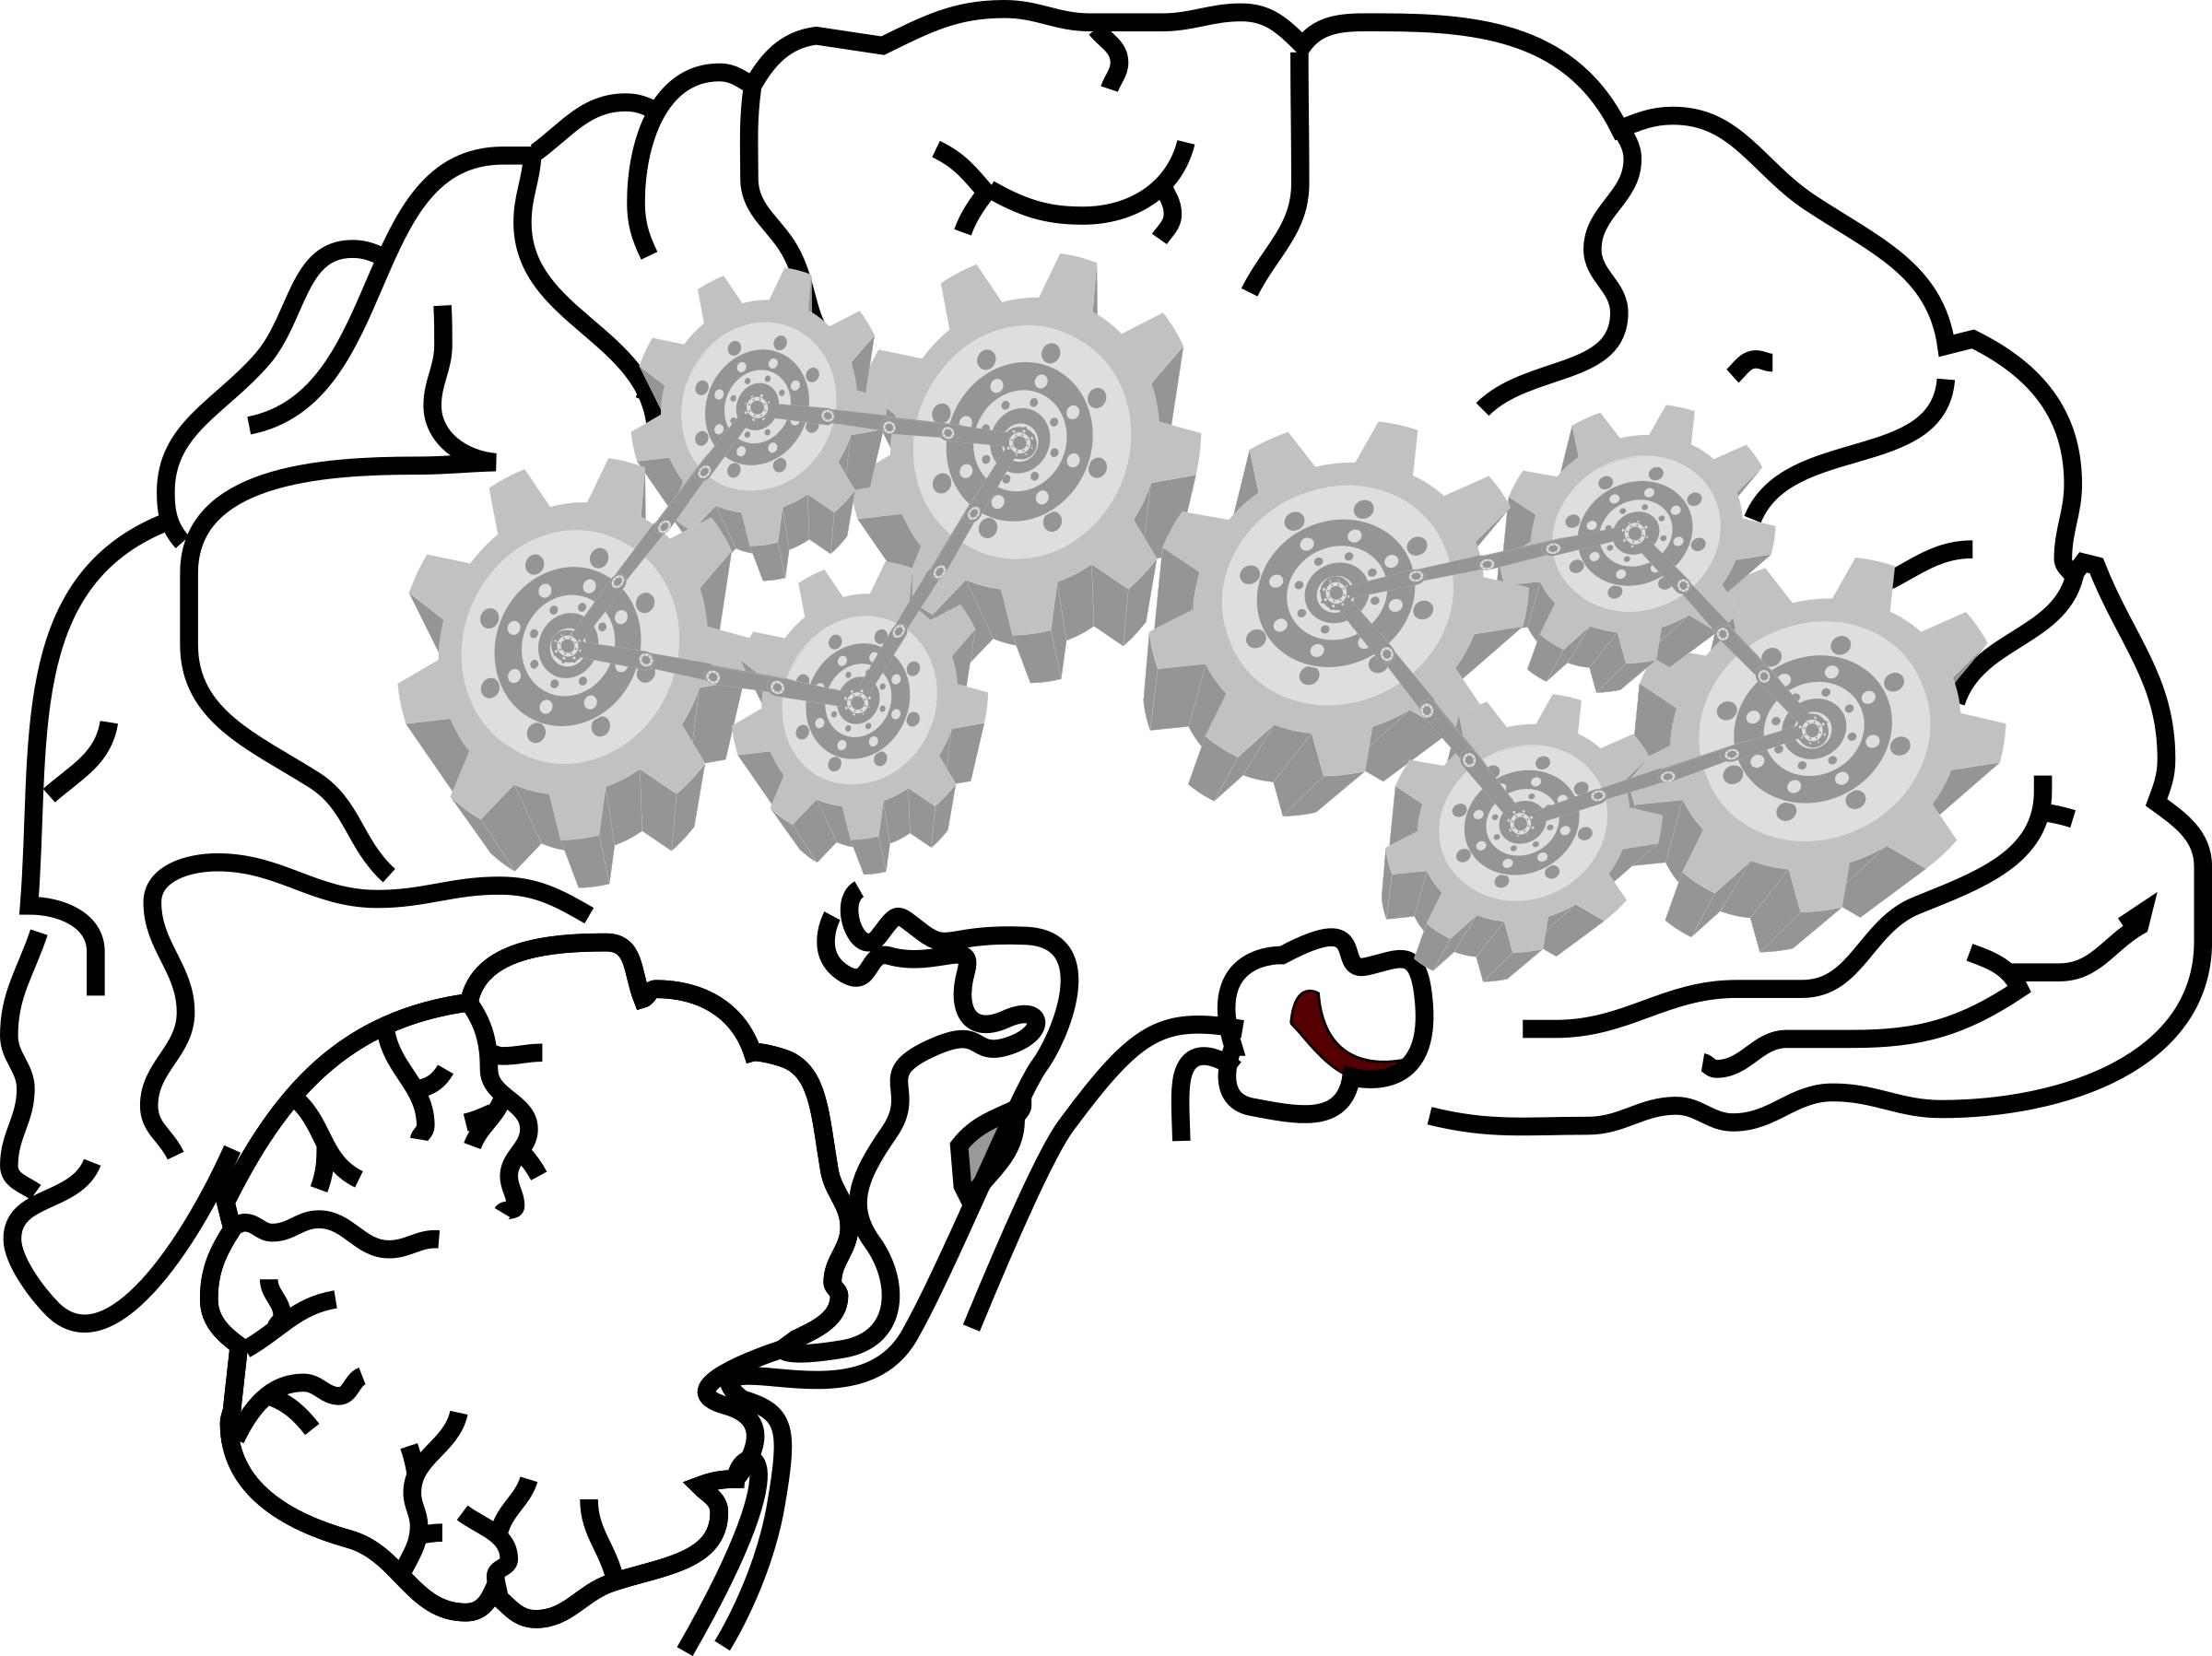 Gear brain PNG icons